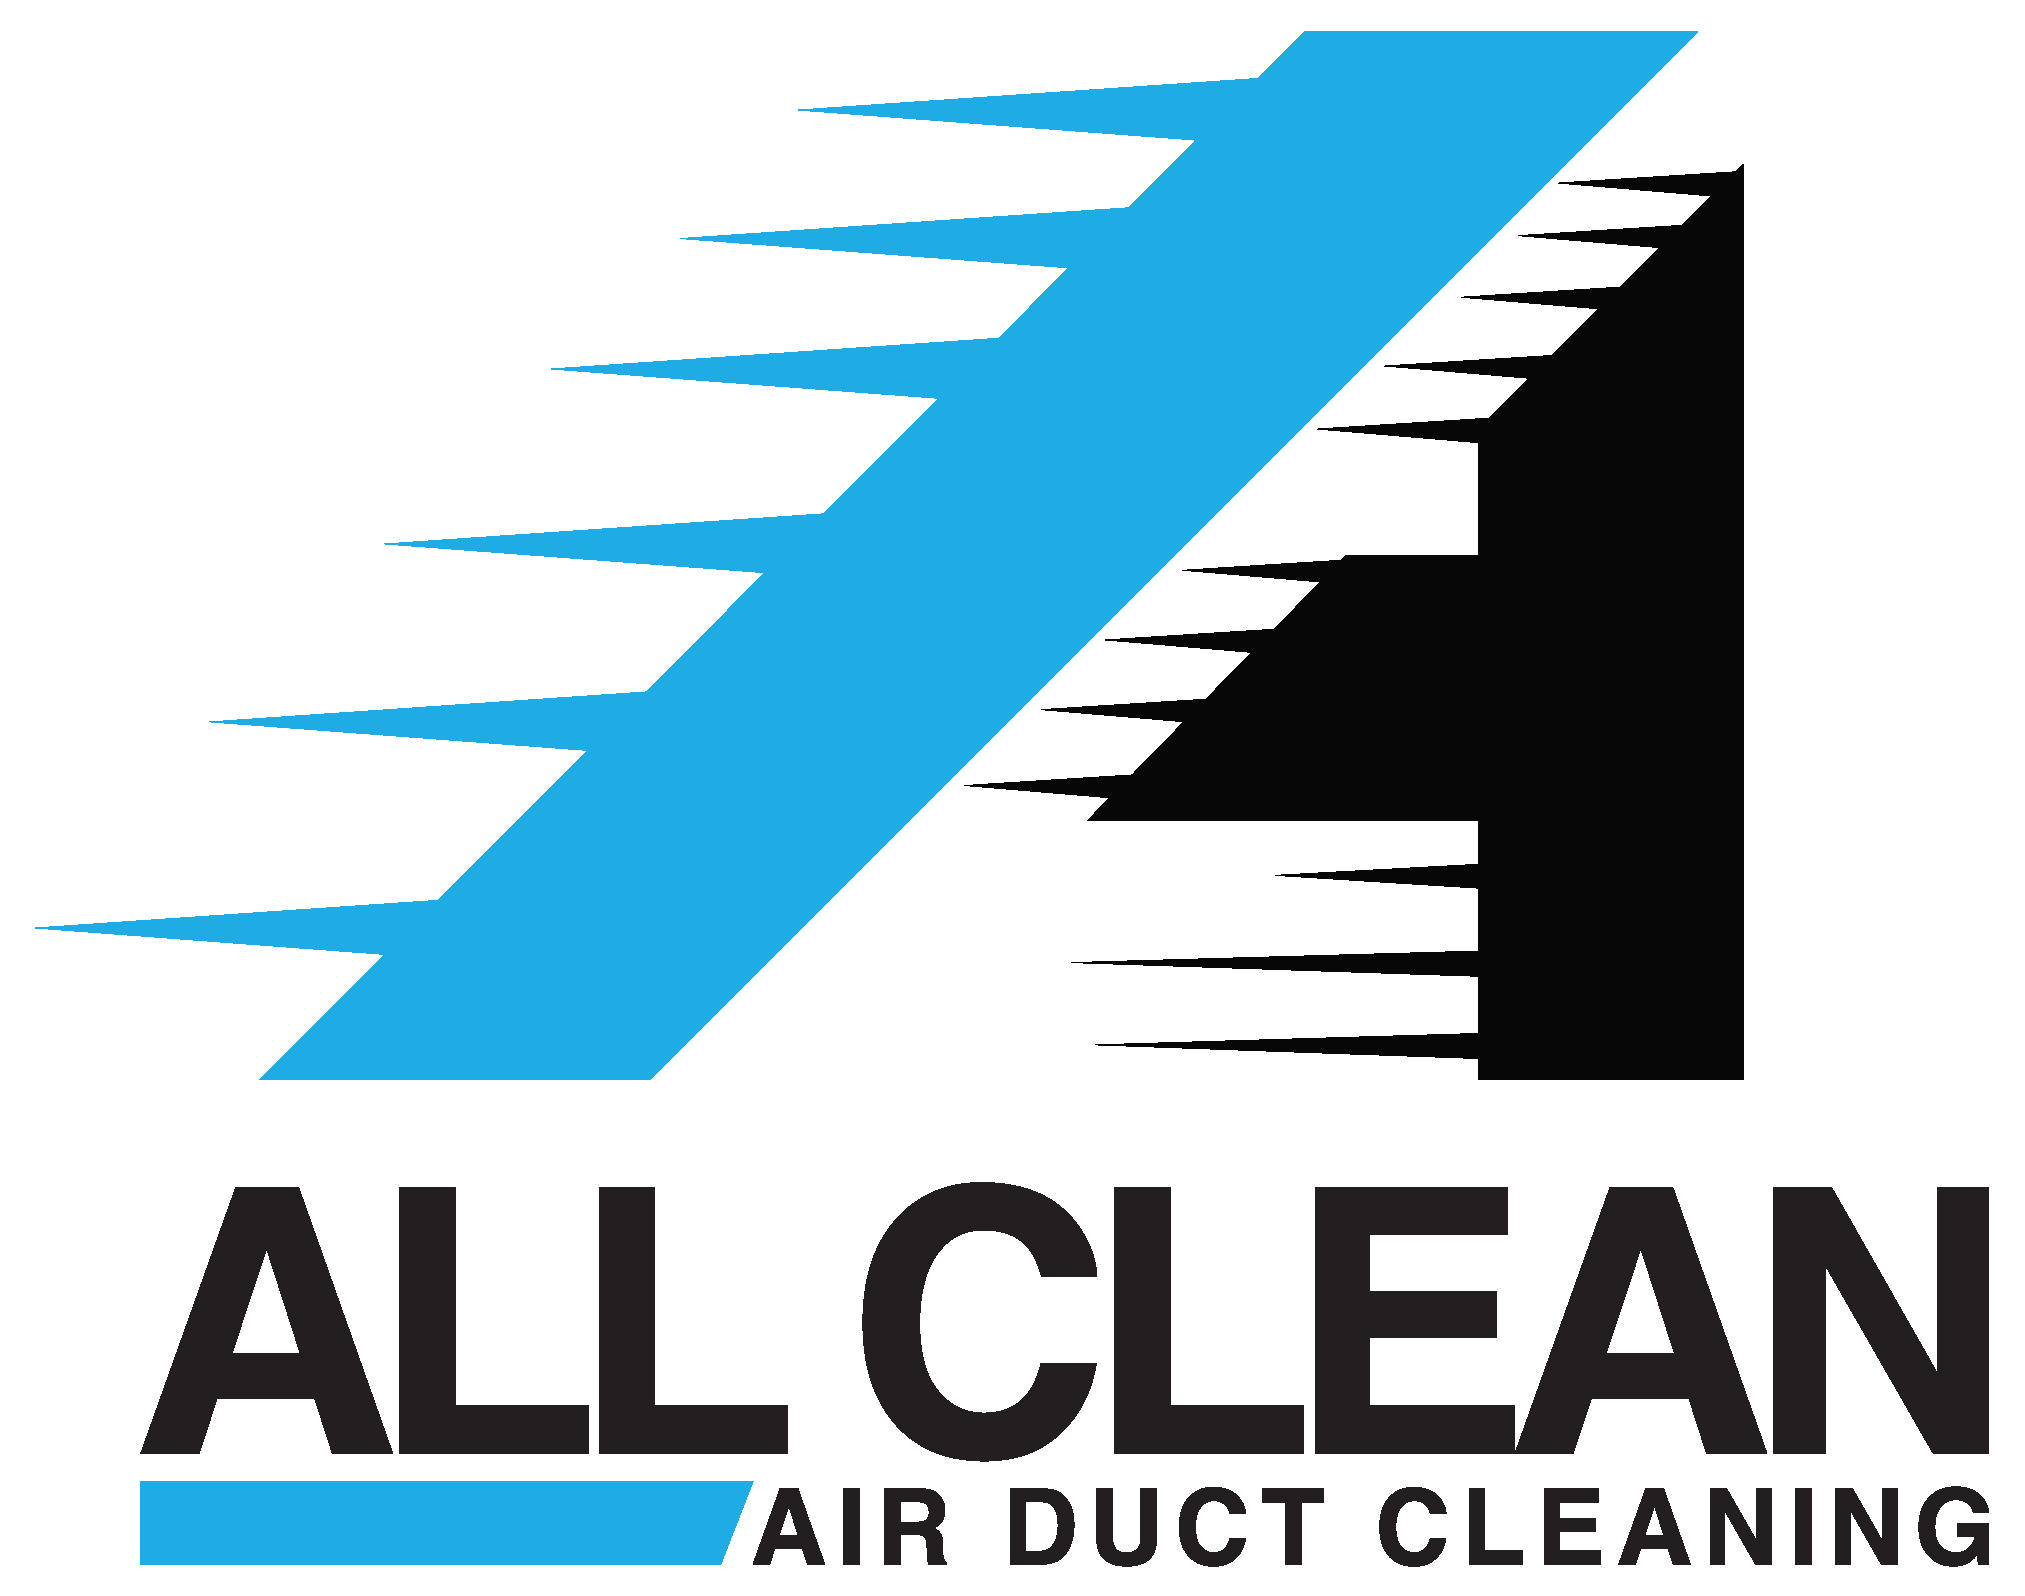 Learn How To Find A Reputable Air Duct Cleaning Company In Salt Lake City, UT